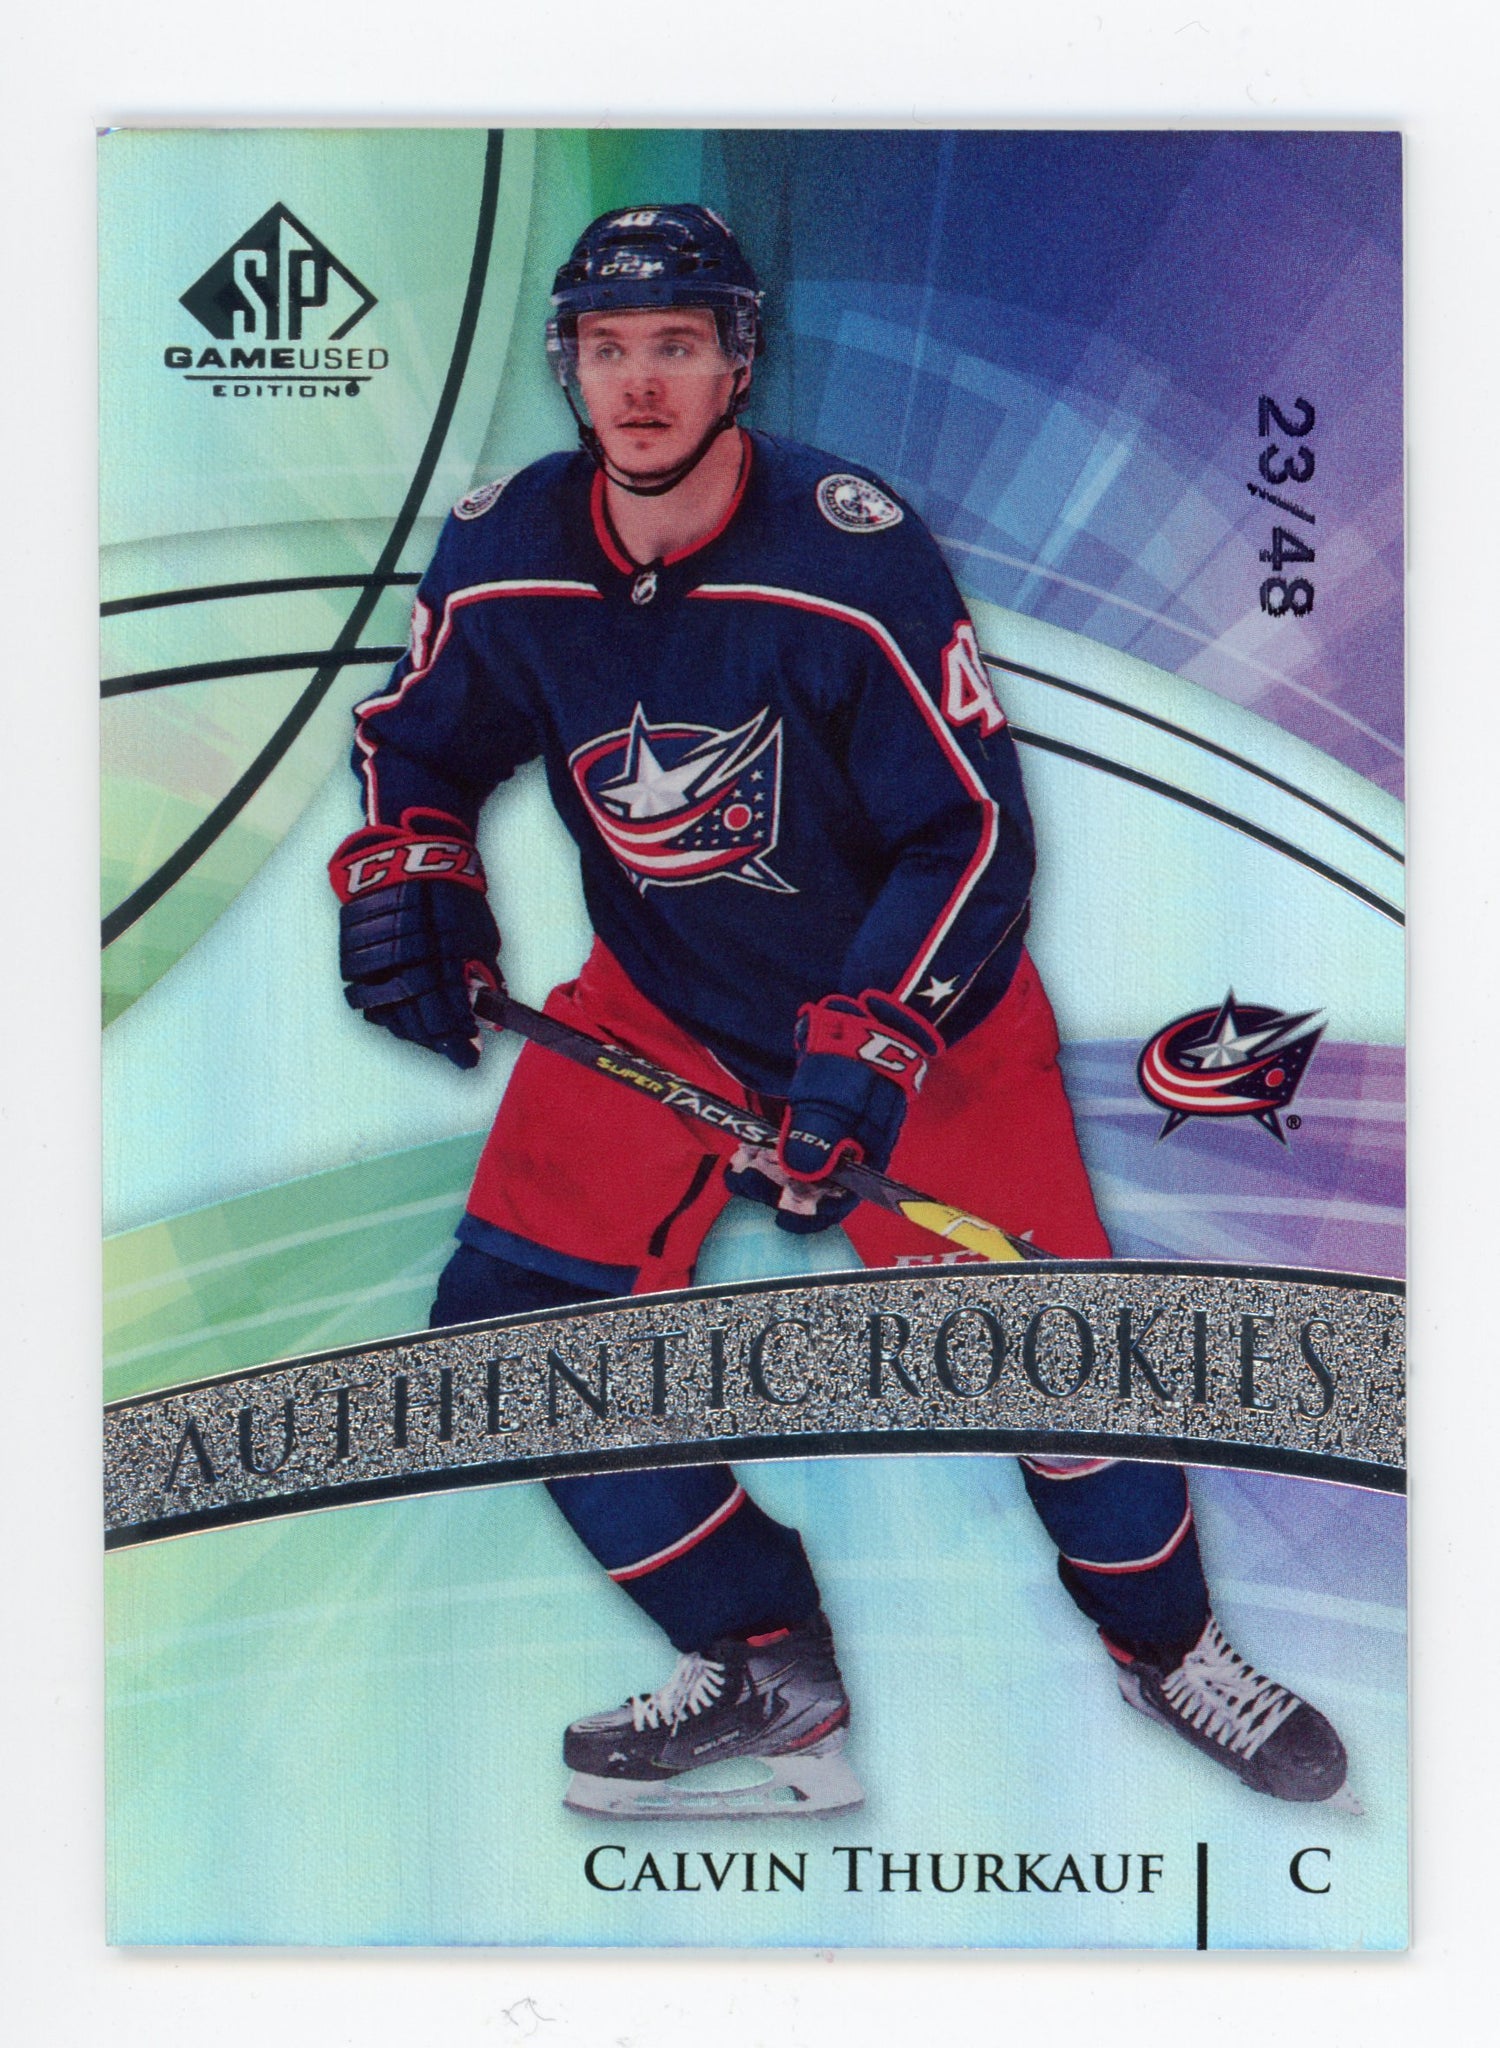 2020-2021 Calvin Thurkauf Authentic Rookies #d /48 SP Game Used Columbus Blue Jackets # 168